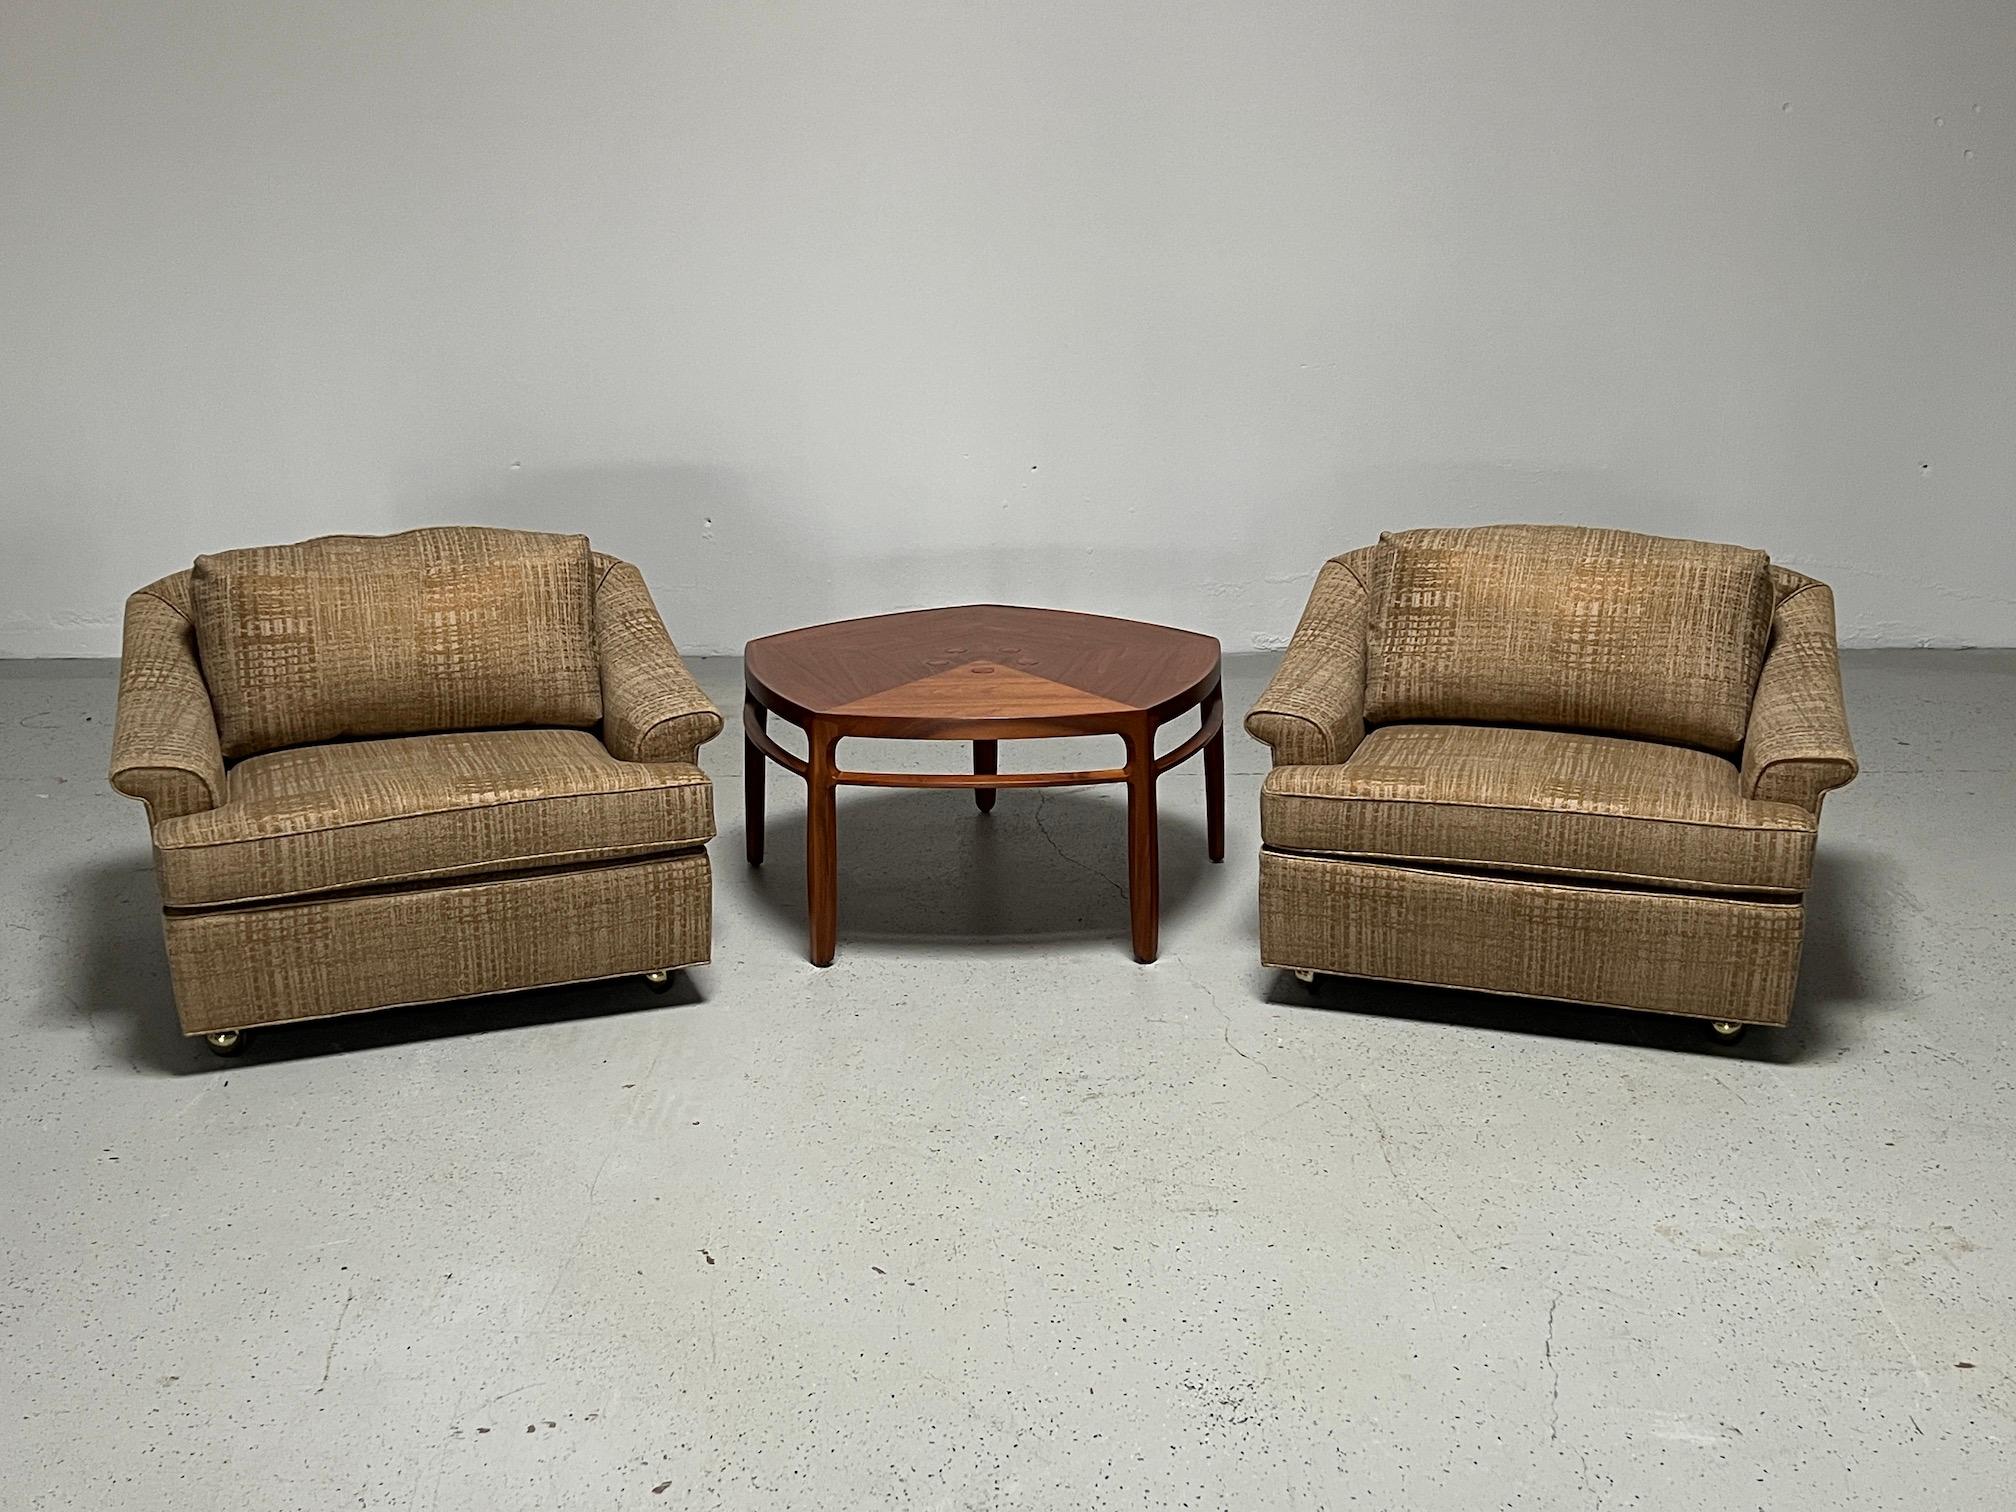 An oversized pair of Edward Wormley for Dunbar lounge chairs with full down back cushions, sitting on four casters. Matching ottoman on casters as well. Fully restored and upholstered in Donghia fabric.